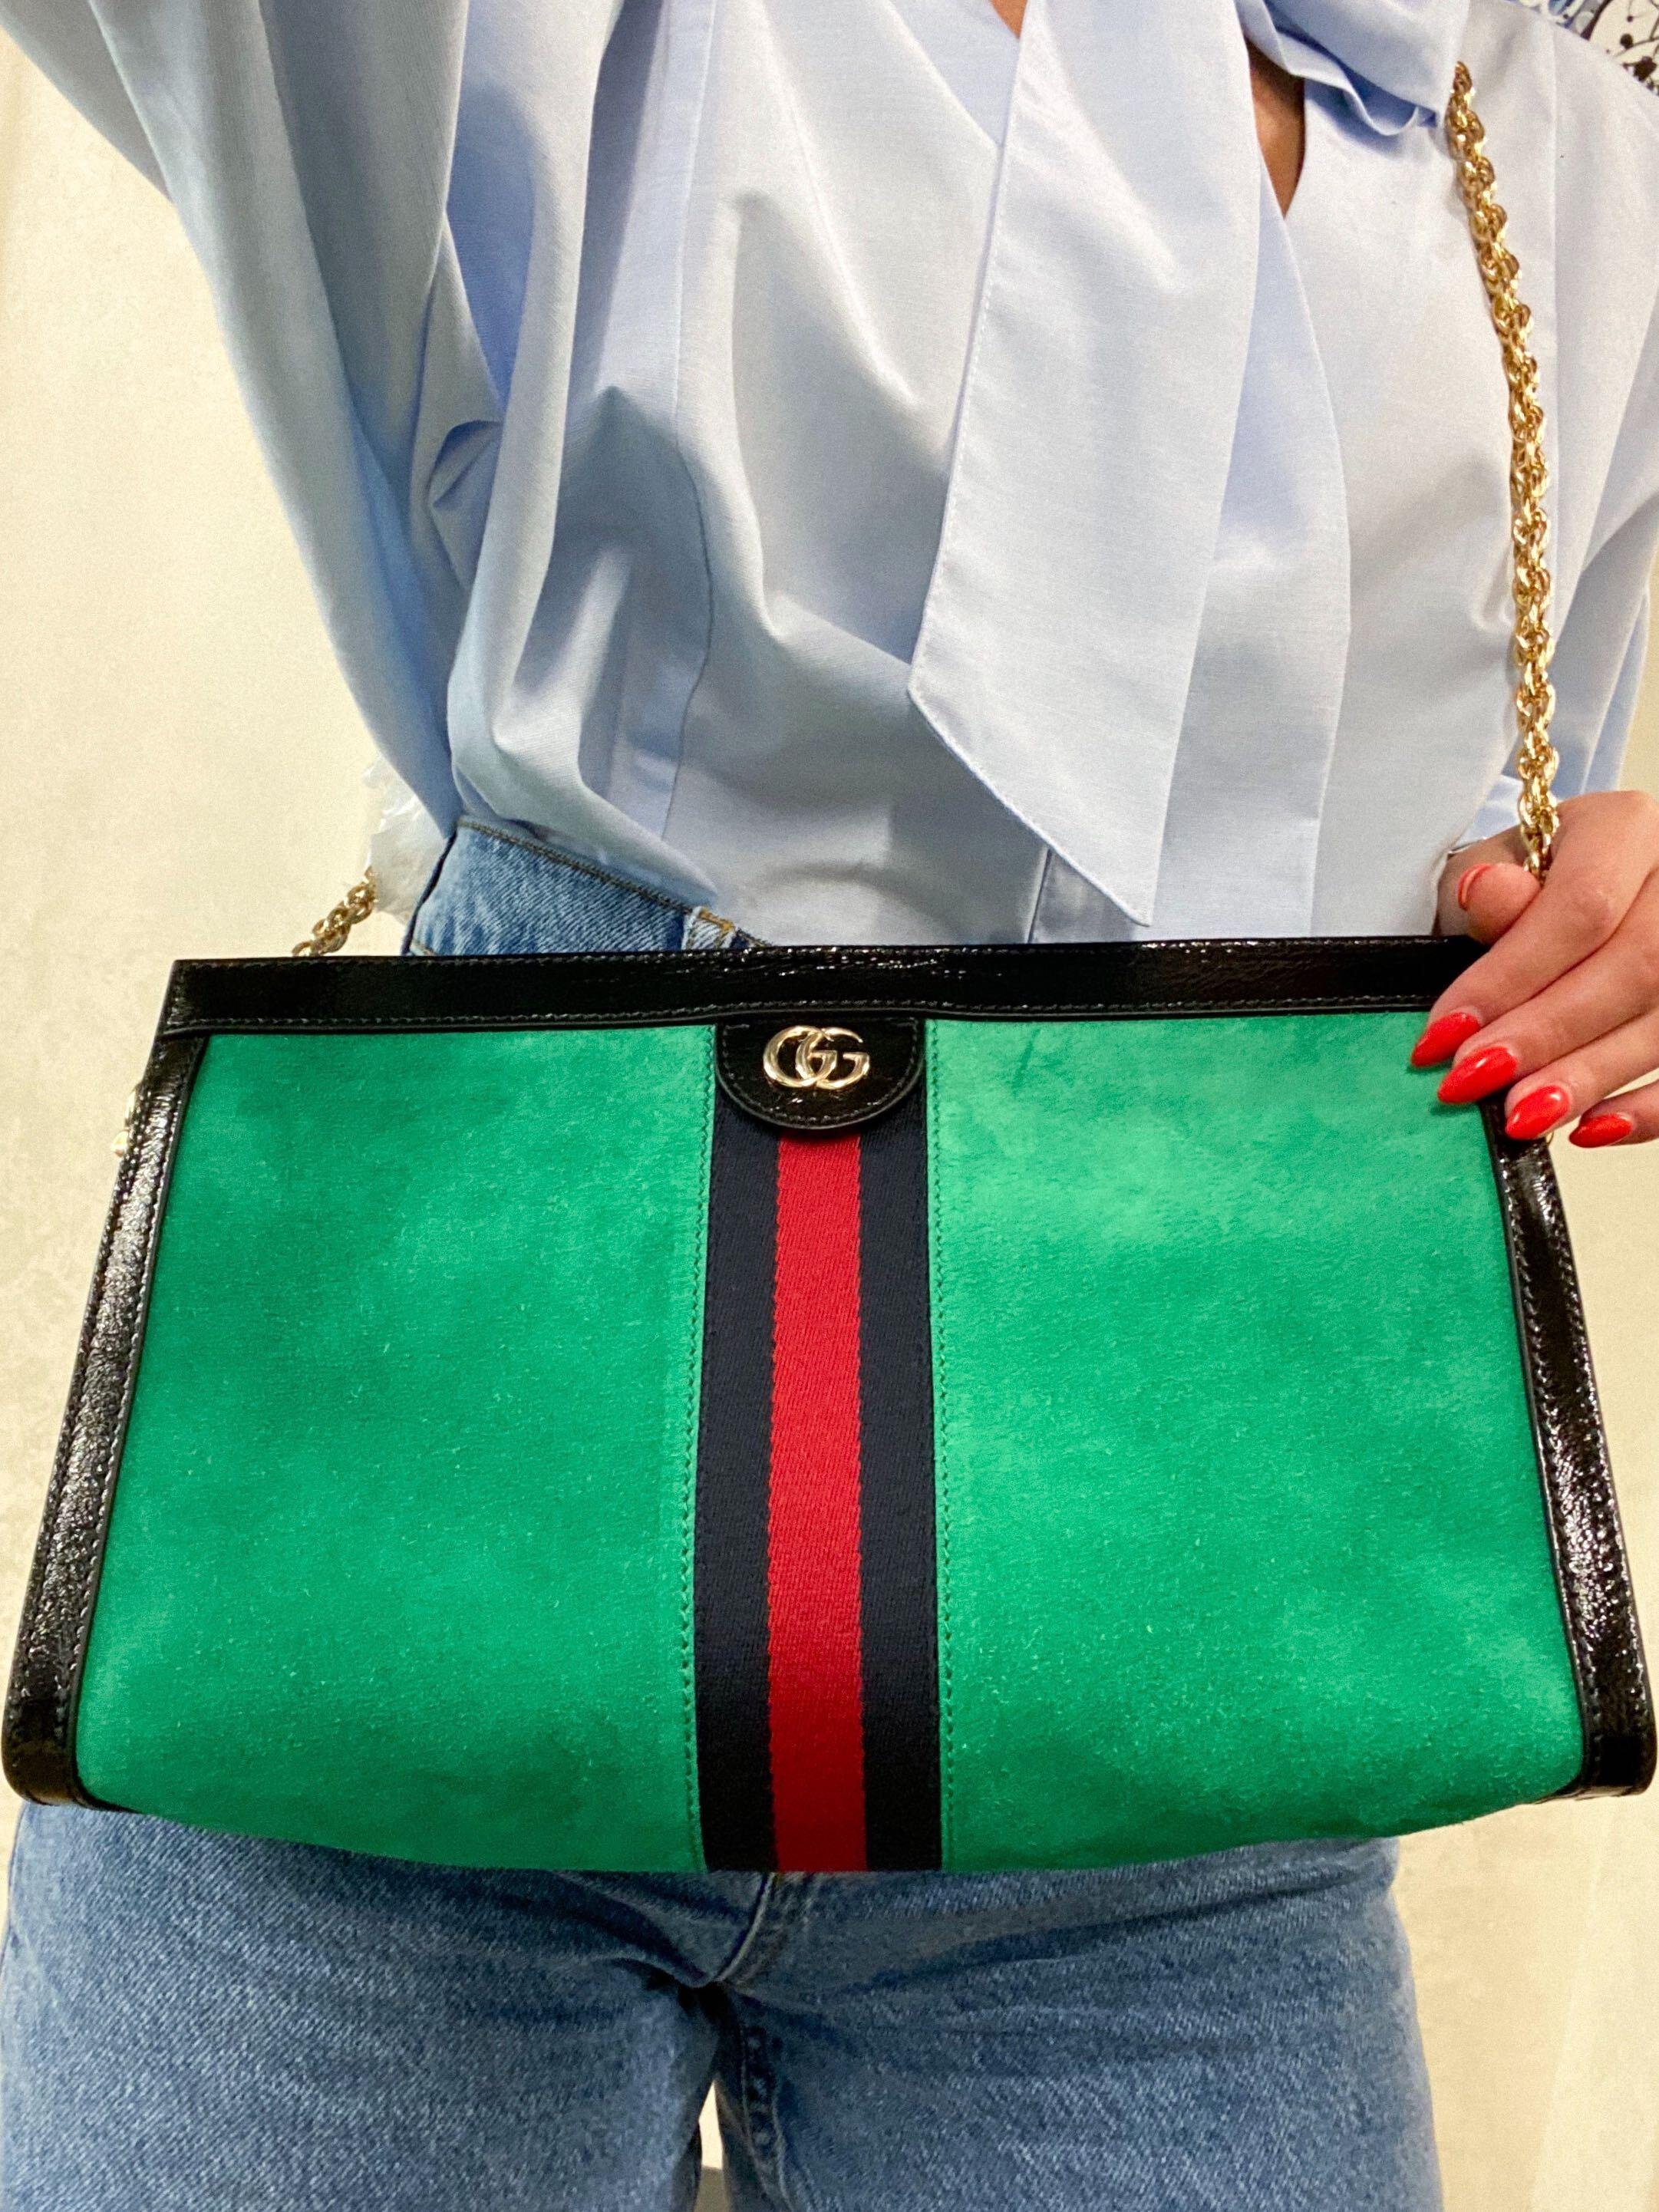 Gucci Ophidia Chain Green Suede Shoulder Bag Size Medium 503876  5